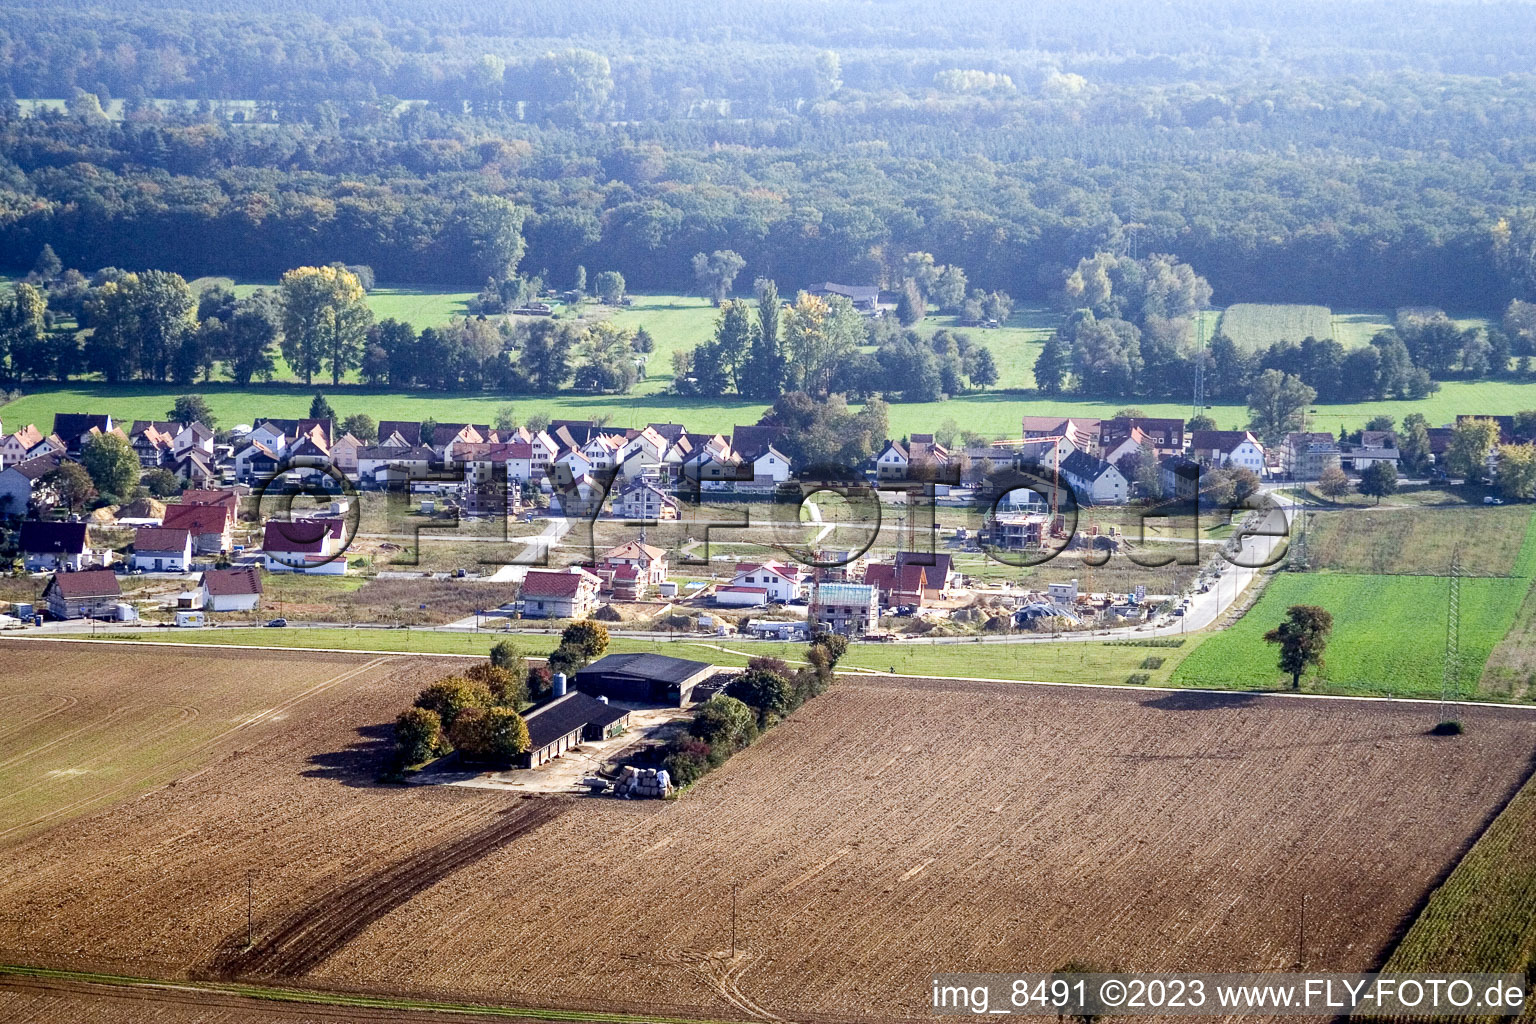 Drone recording of New development area on the Höhenweg in Kandel in the state Rhineland-Palatinate, Germany